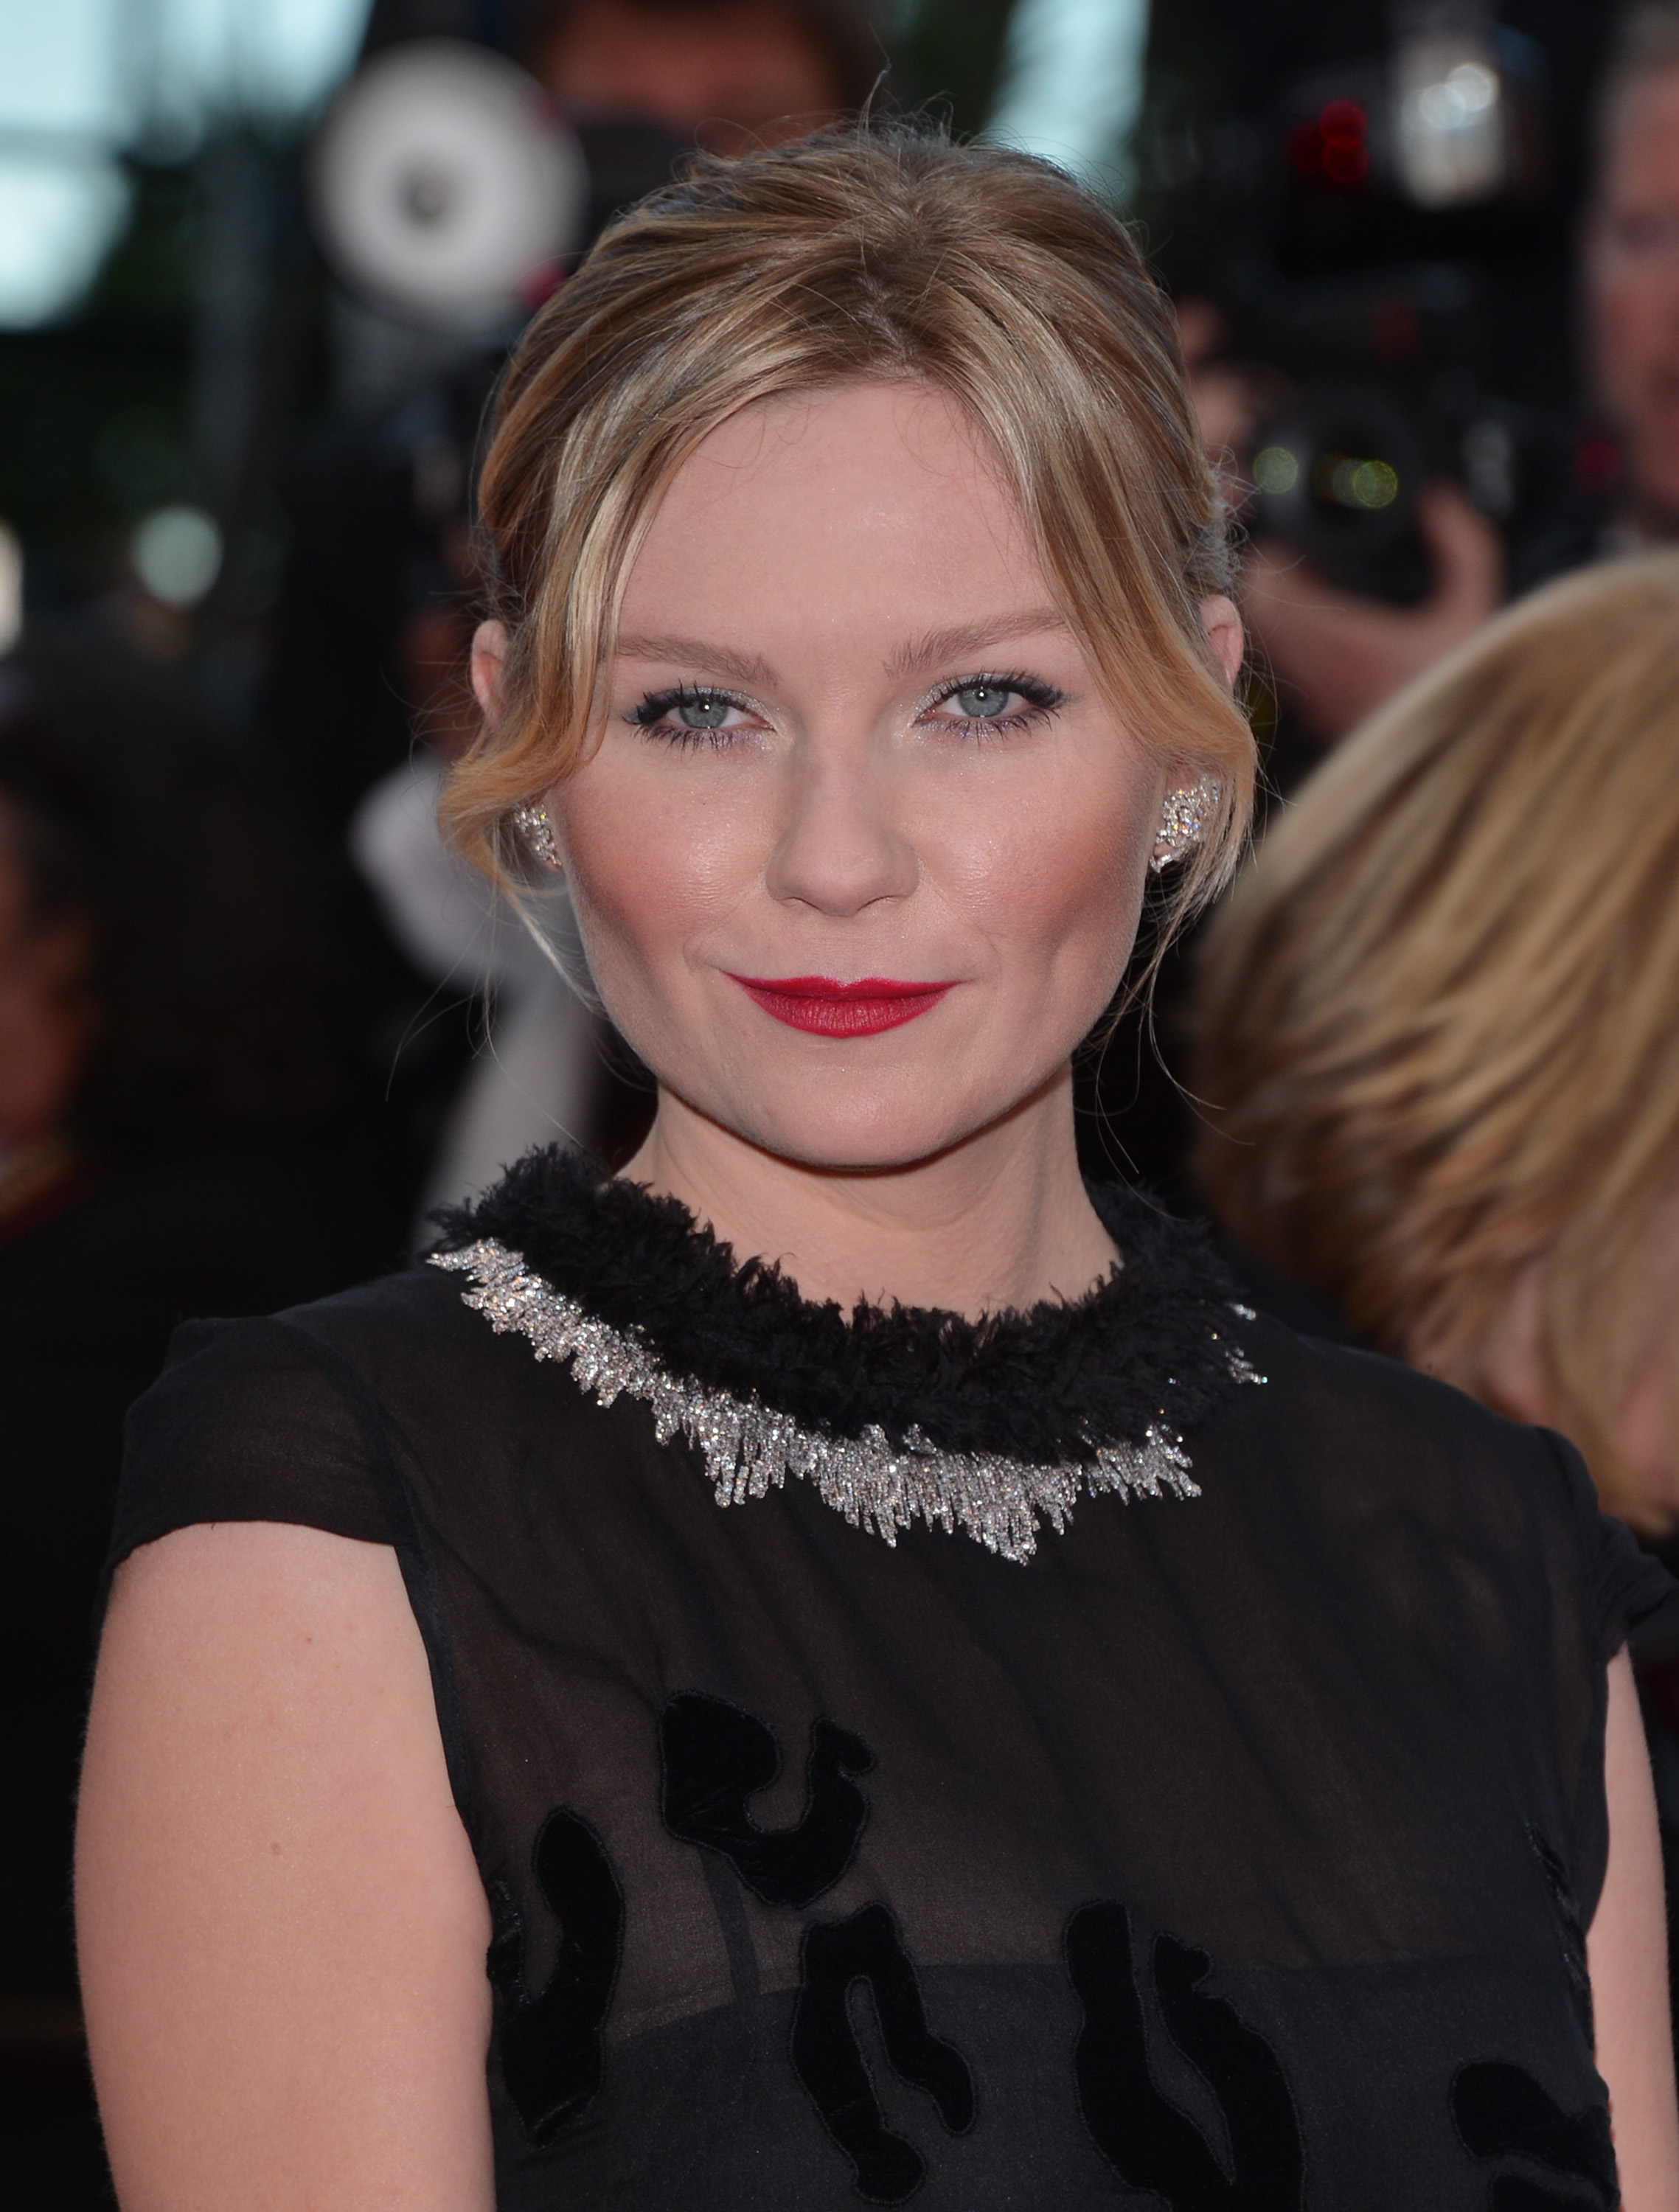 Kirsten Dunst attends the Premiere of 'Inside Llewyn Davis' at The 66th Annual Cannes Film Festival on May 19, 2013 in Cannes, France. (George Pimentel—WireImage/Getty Images)